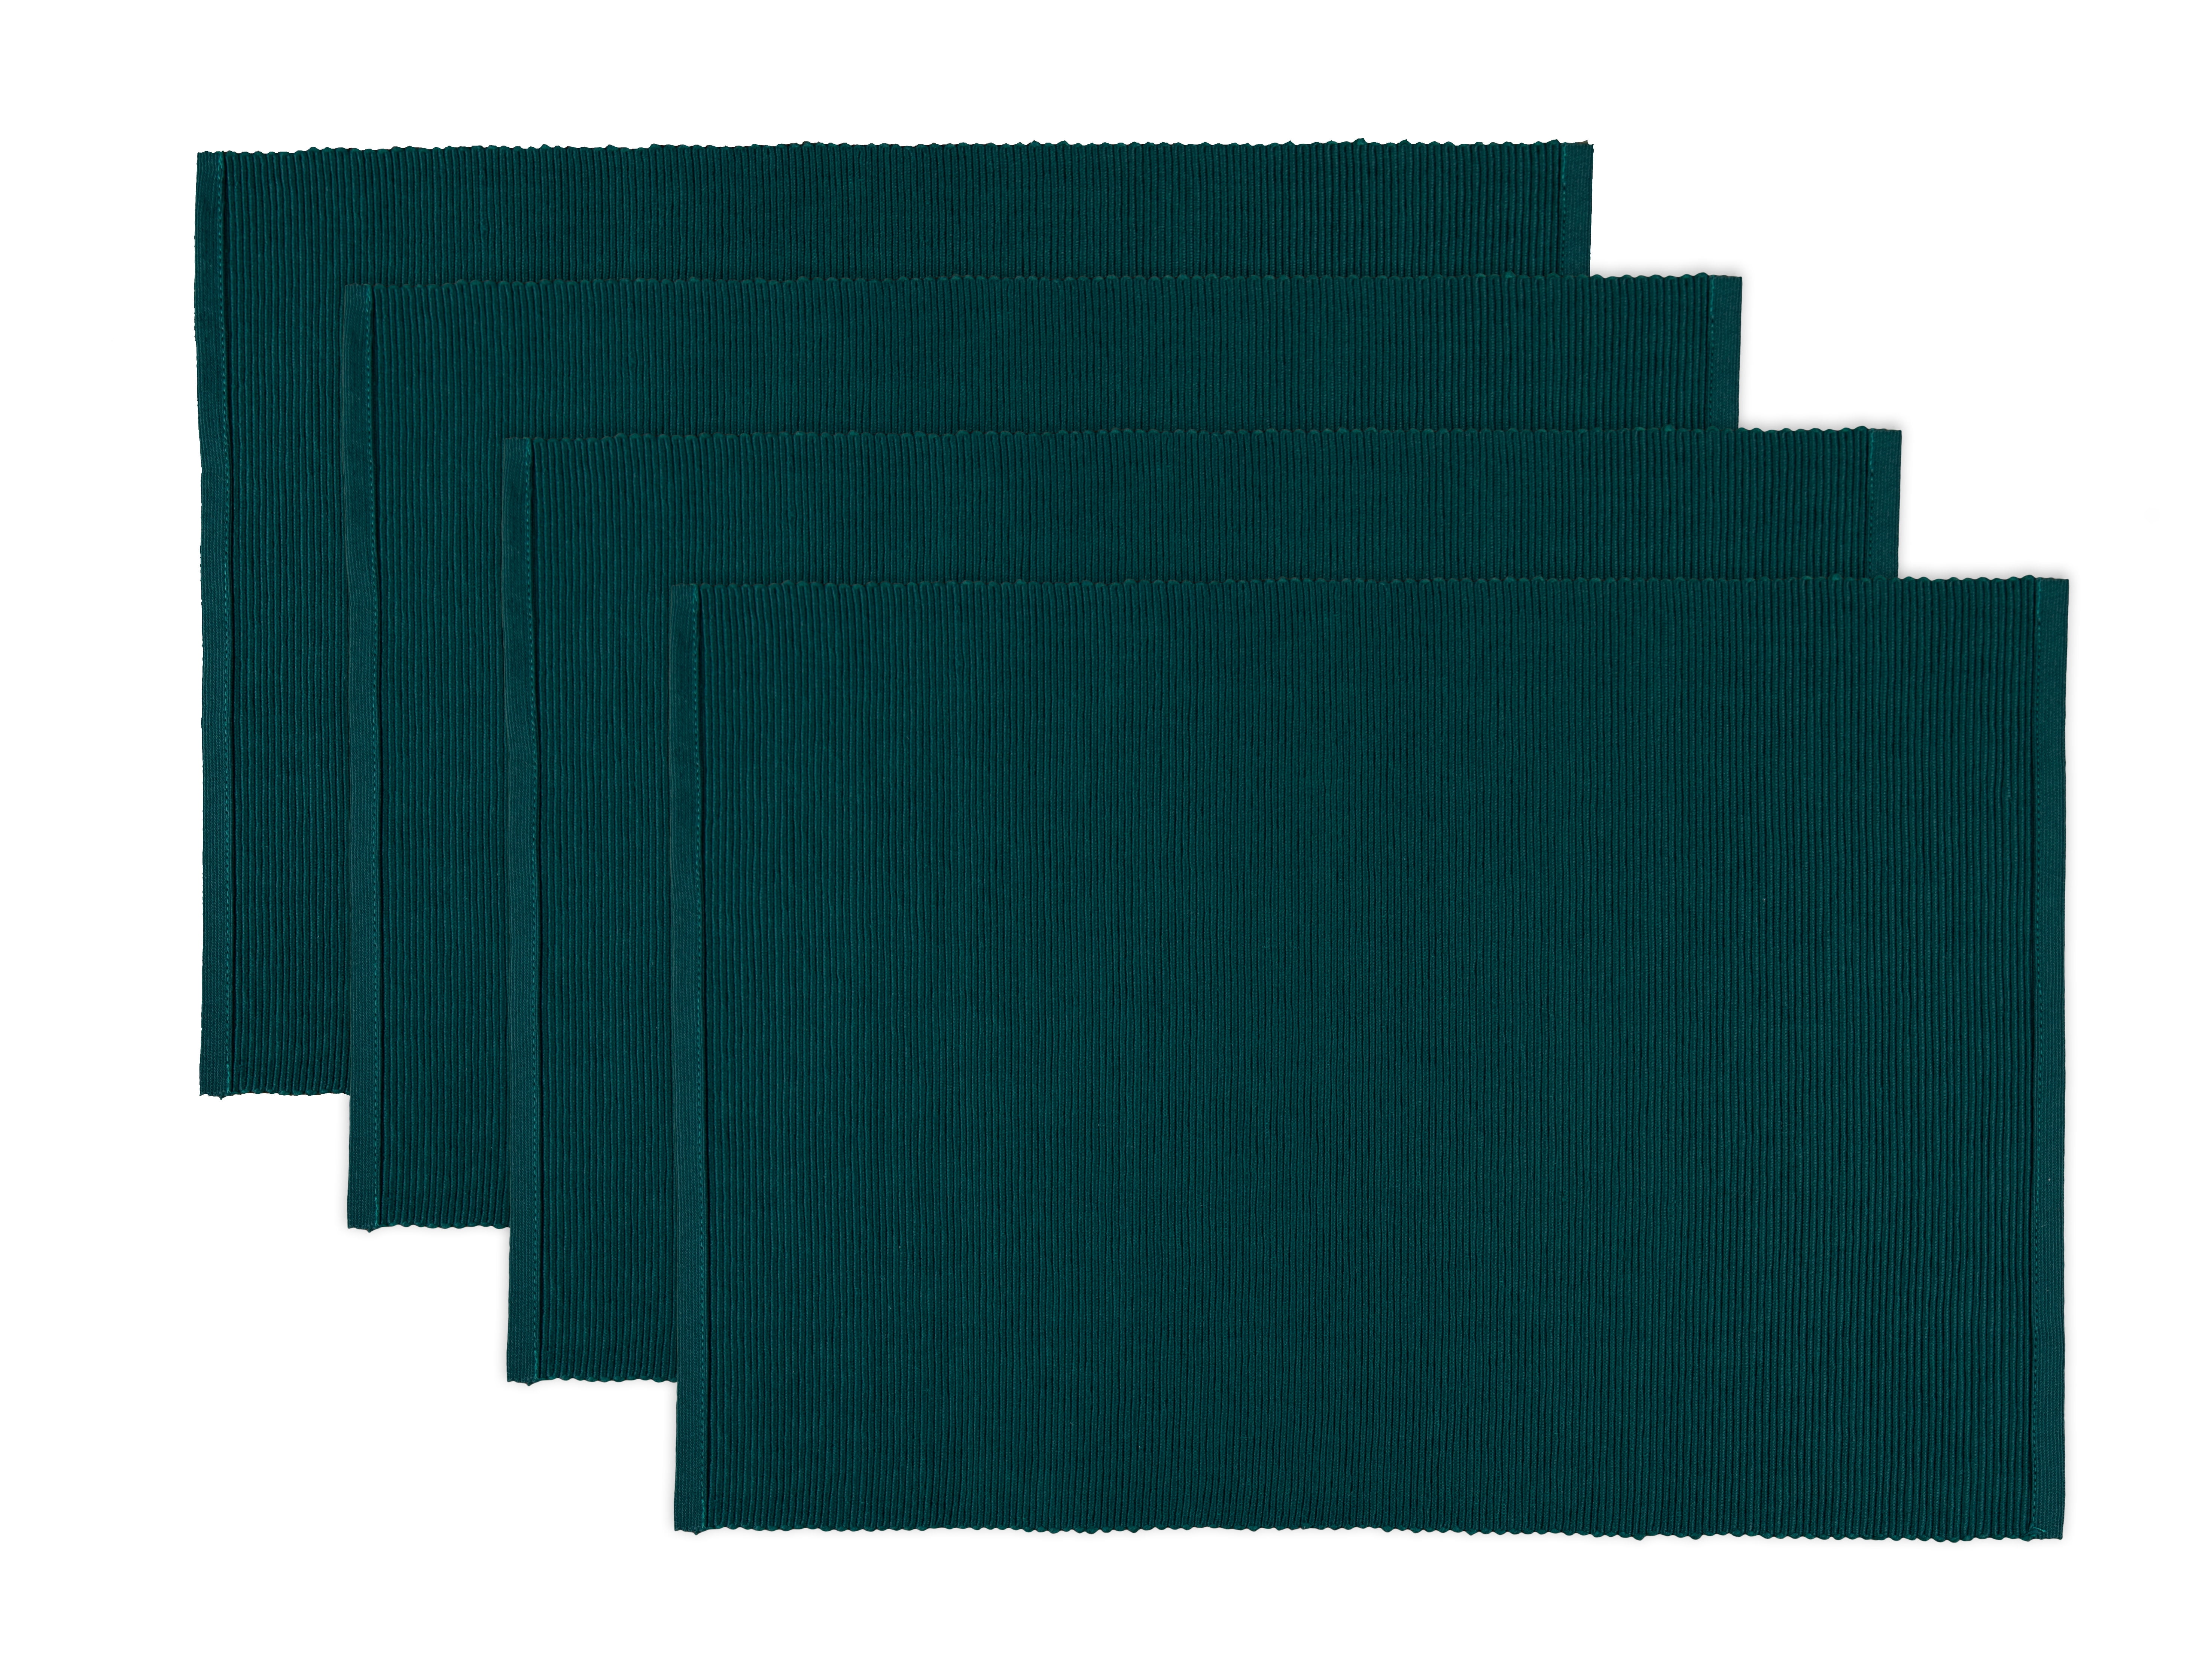 Homewear Durham Teal Cotton Rectangular Placemat 13" x 19" Teal and White New 